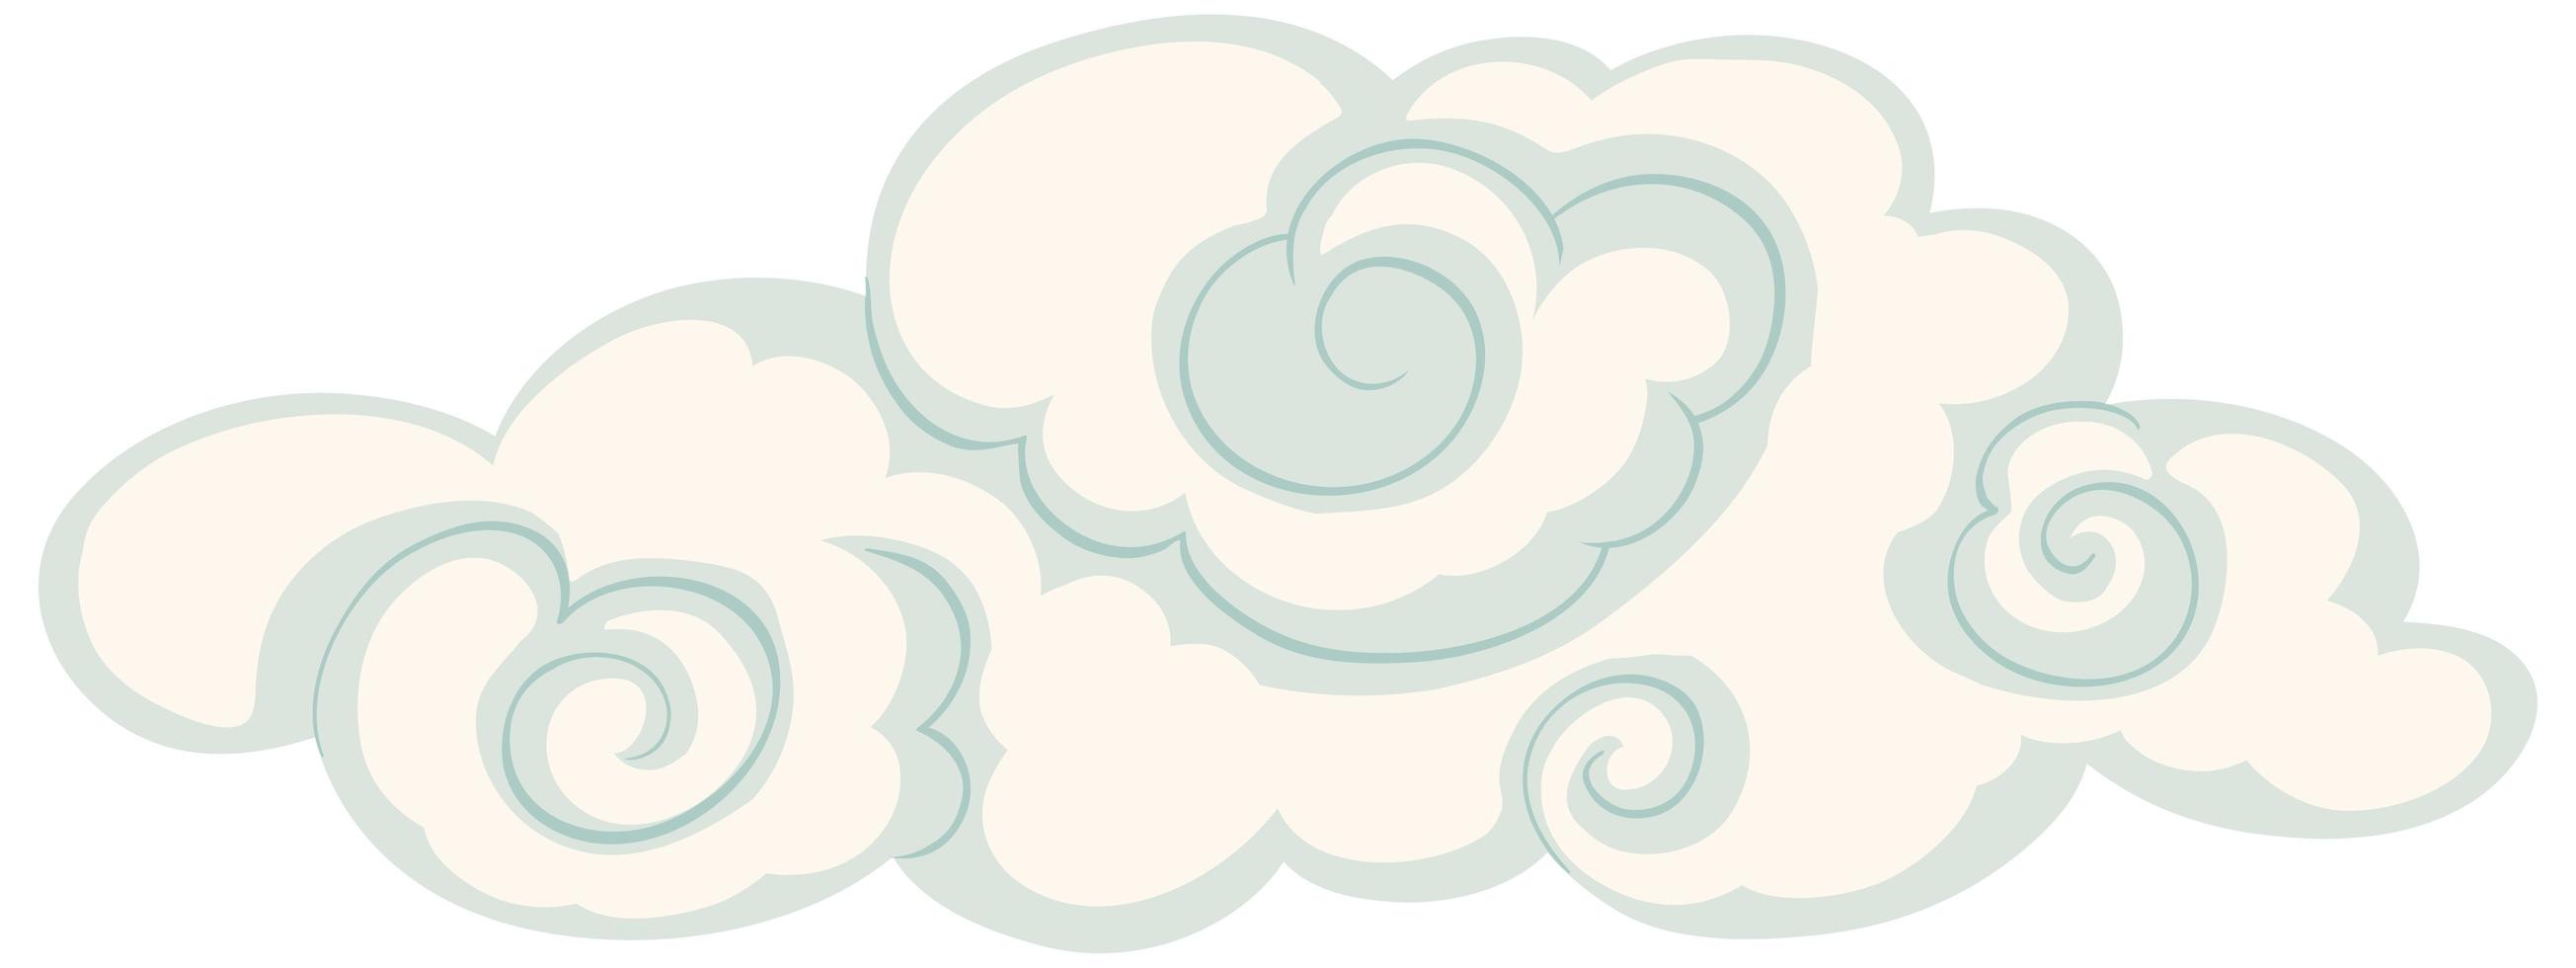 Isolated cloud in chinese style vector